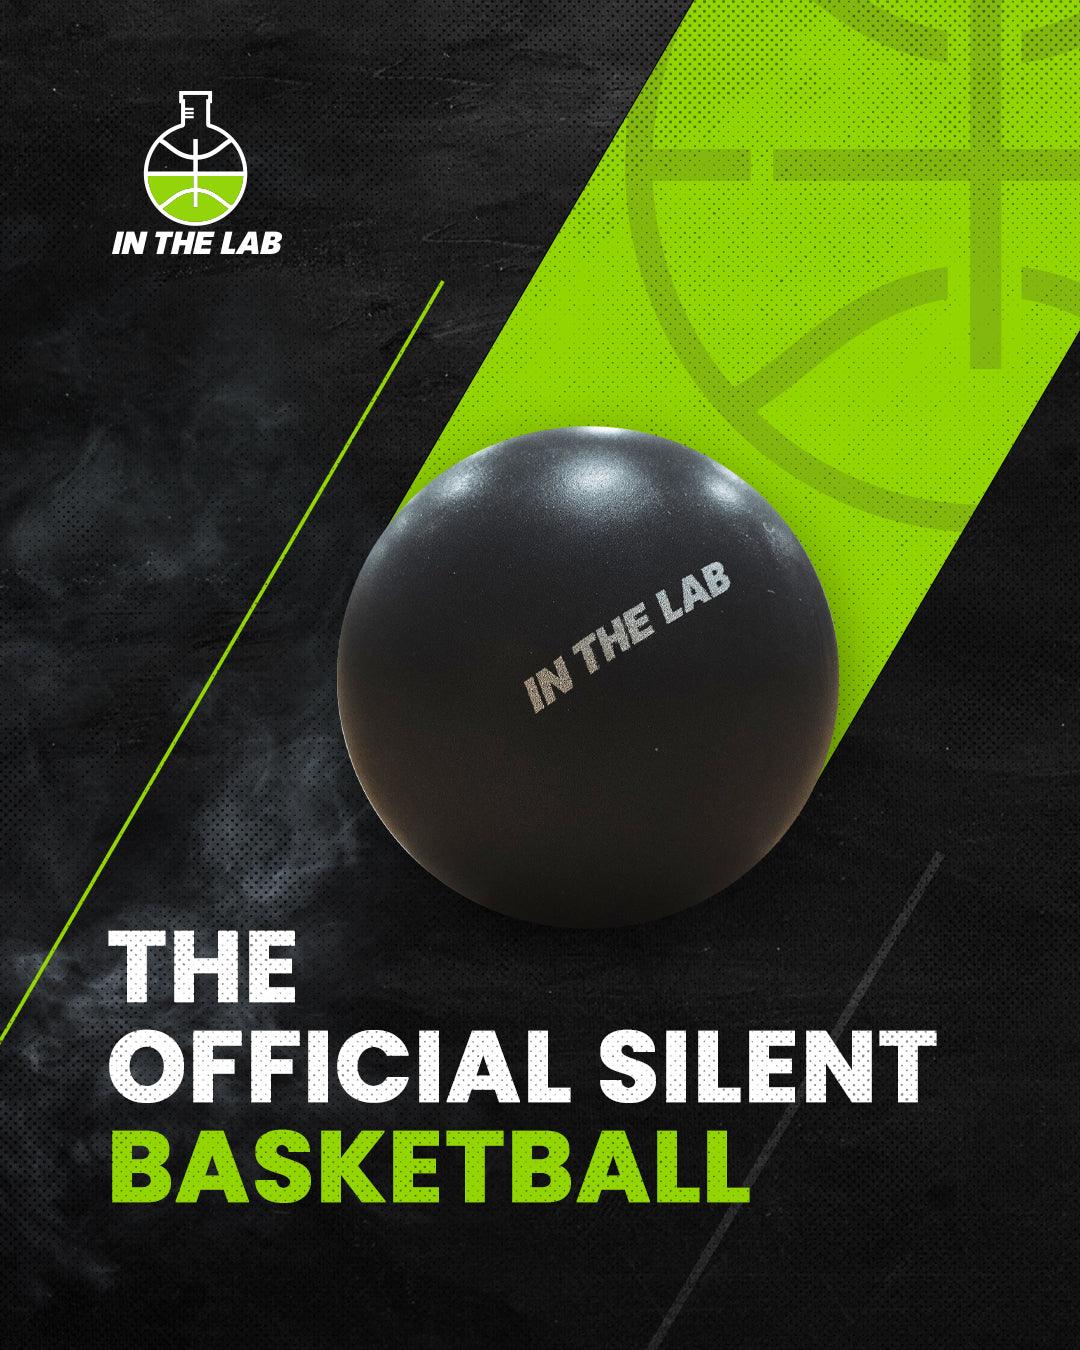  Gbsell Mute Ball Indoor Silent Basketball, 2023 Newest